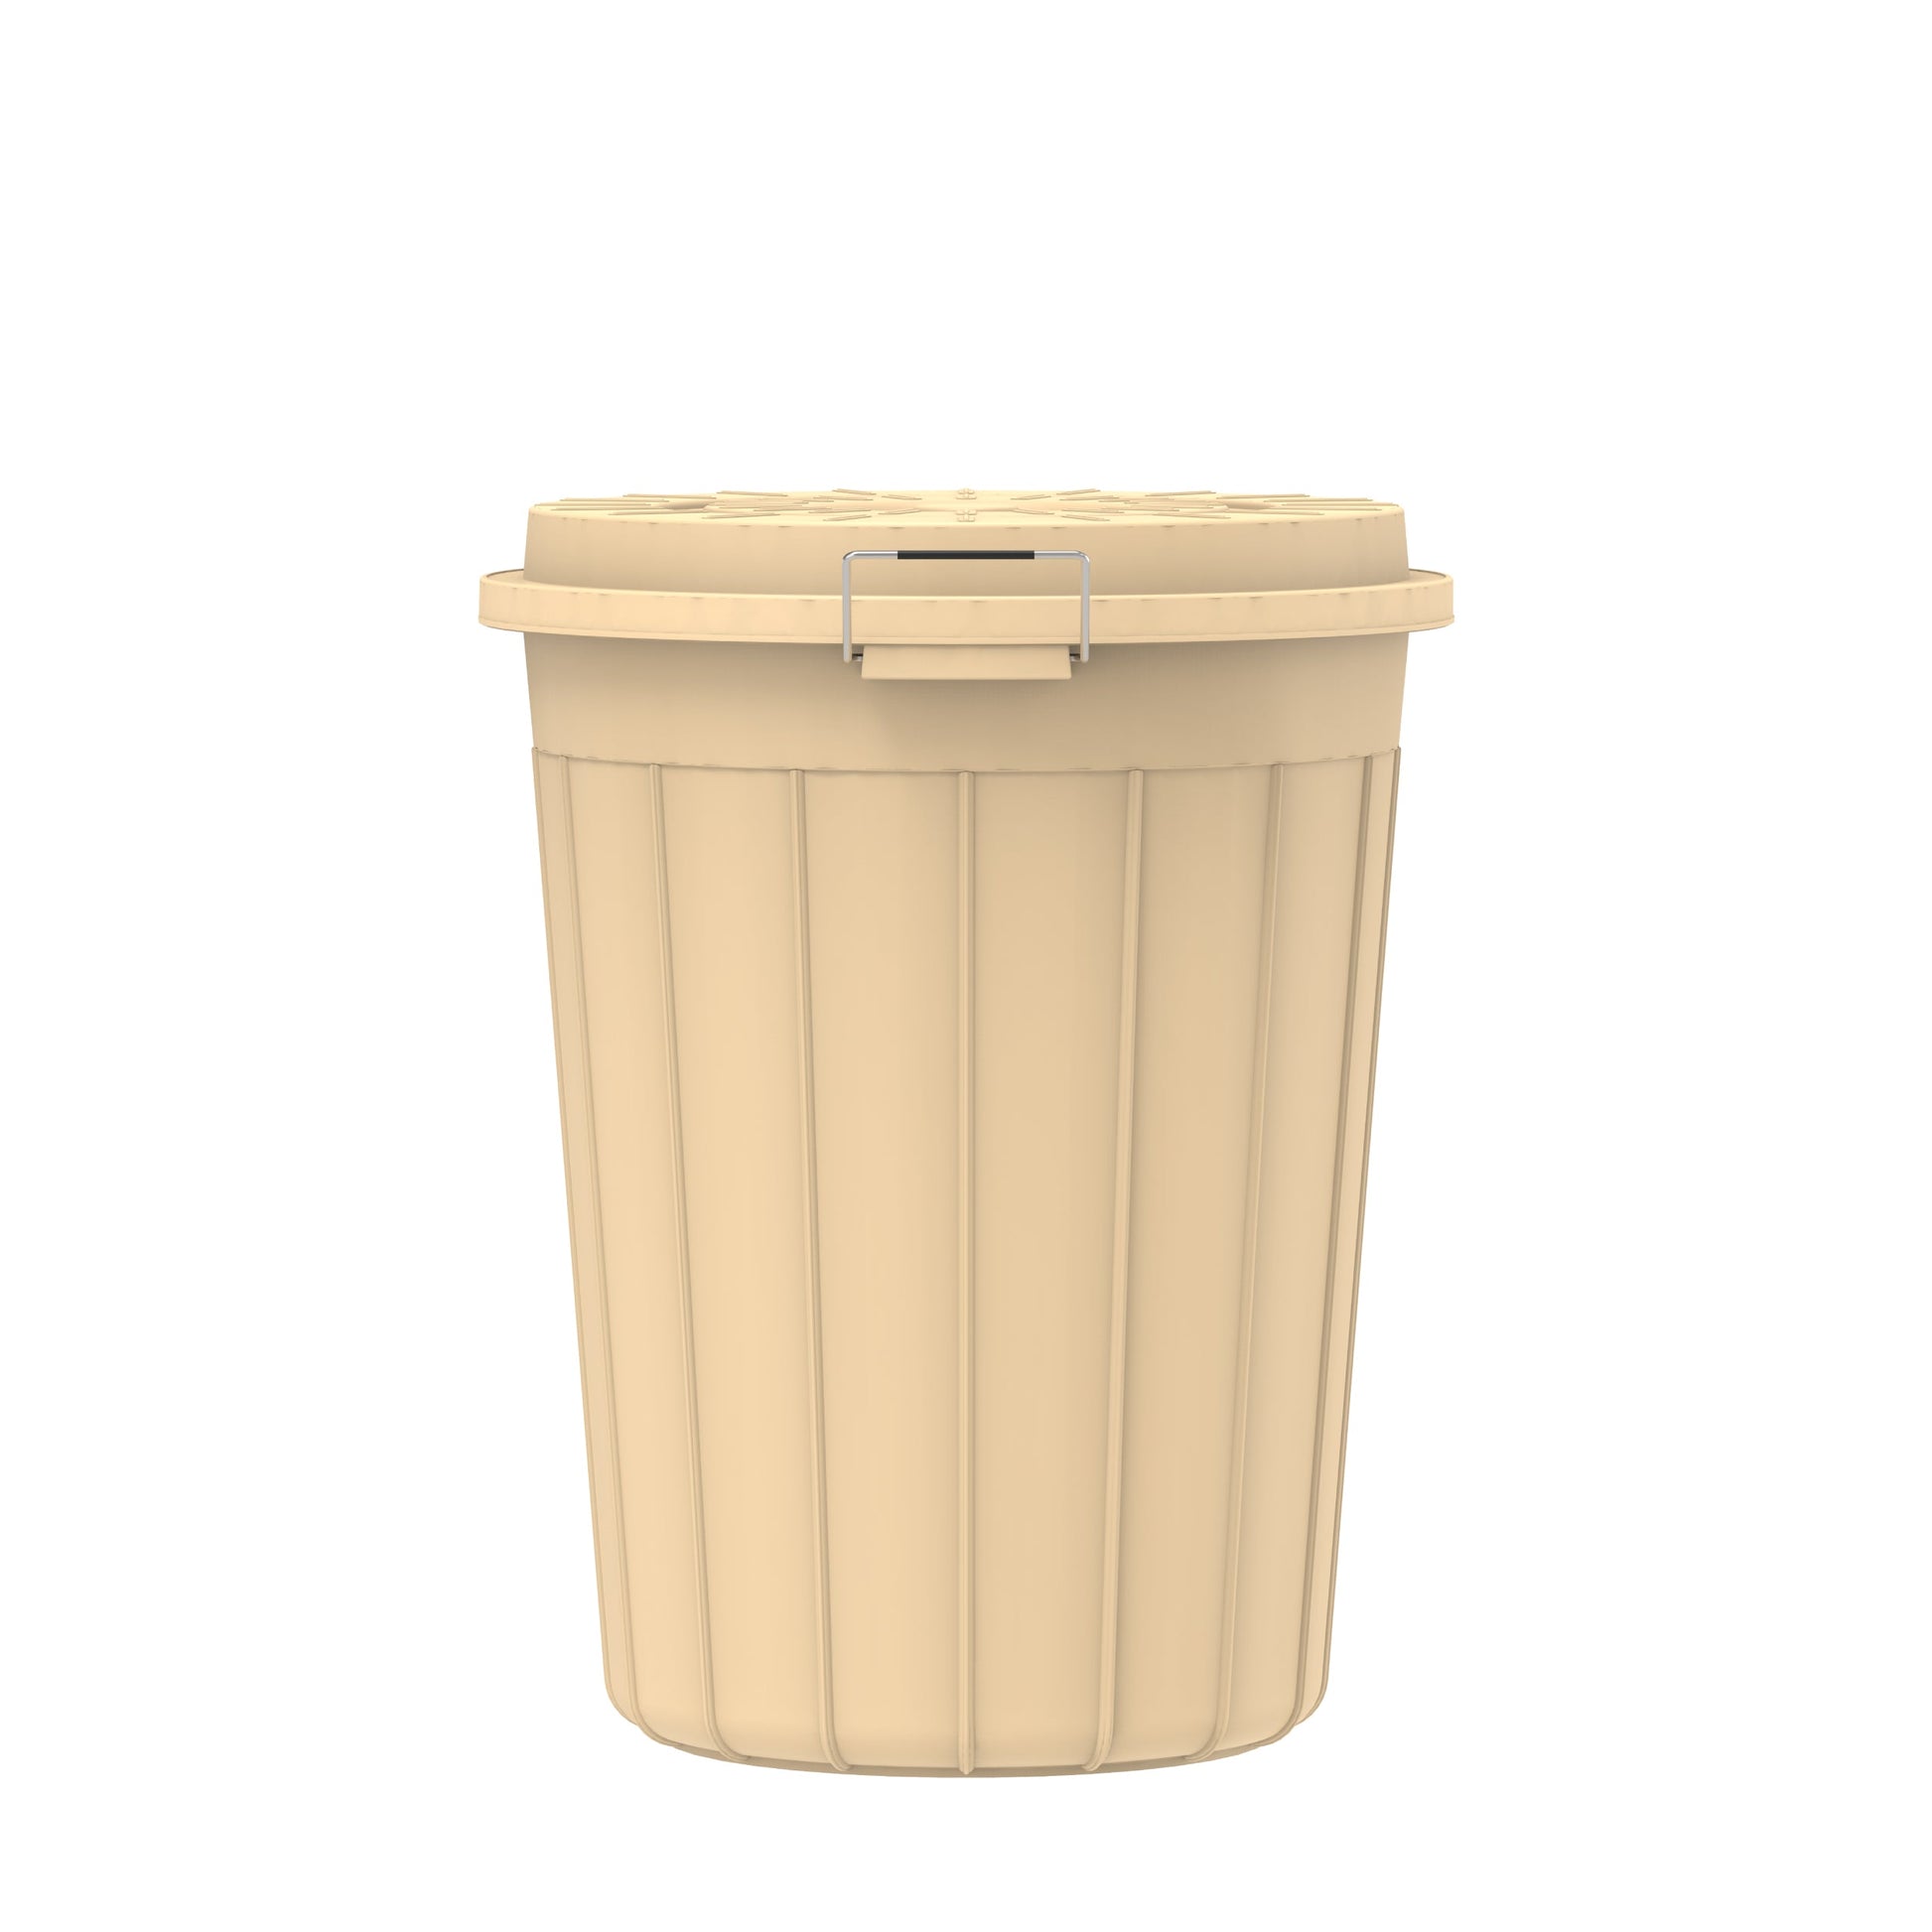 70L Round Plastic Drums with Lid - Cosmoplast Bahrain